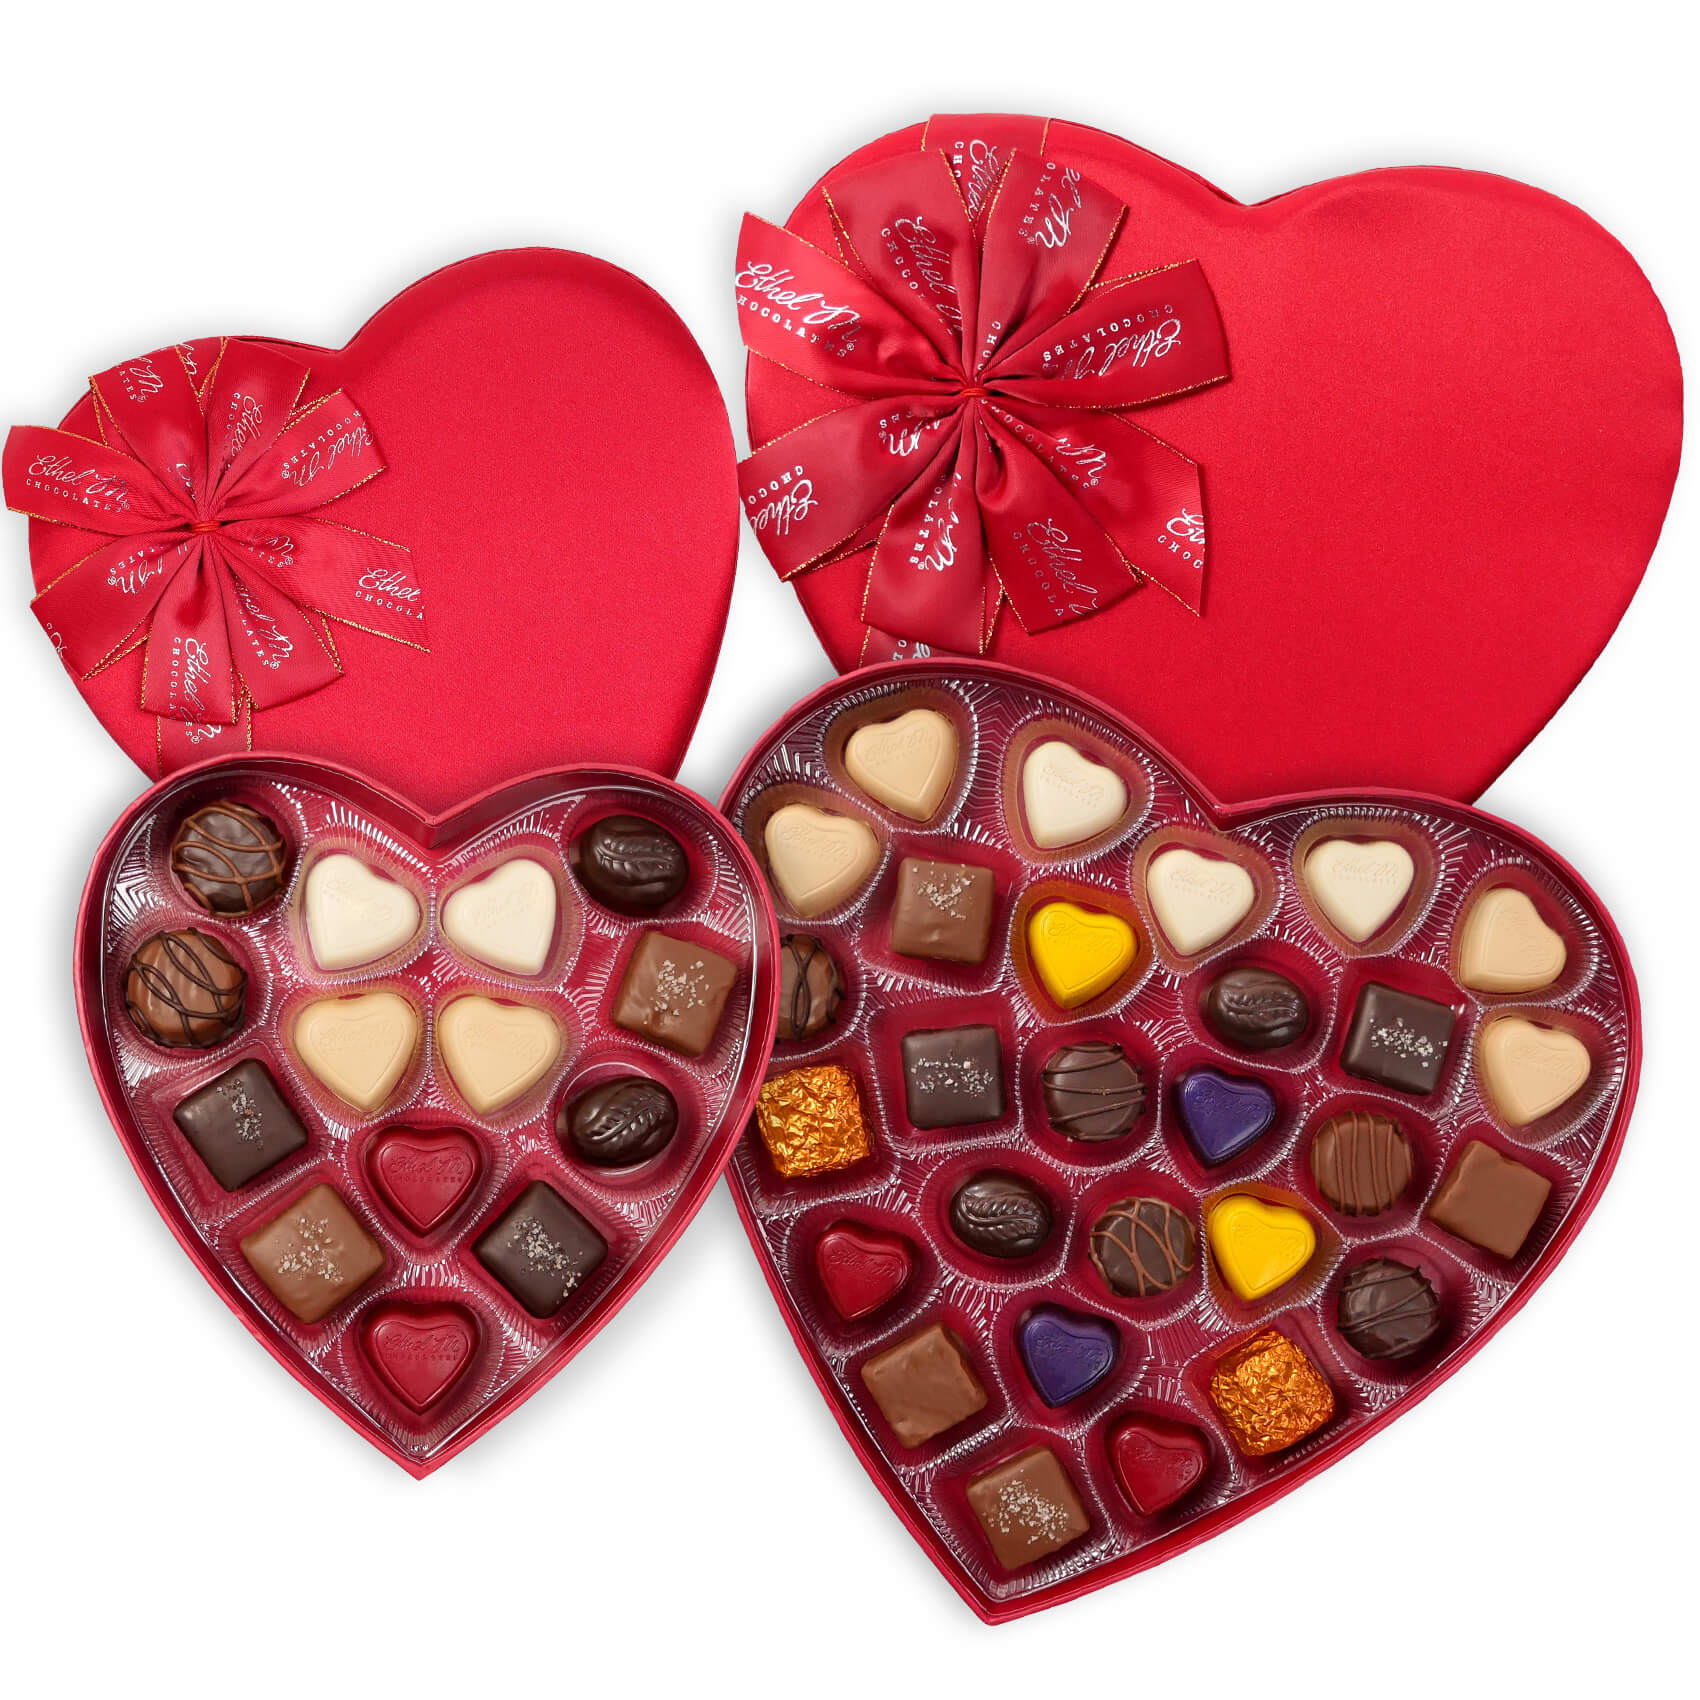 The Heart Collection Chocolate Gift Box 44 Piece